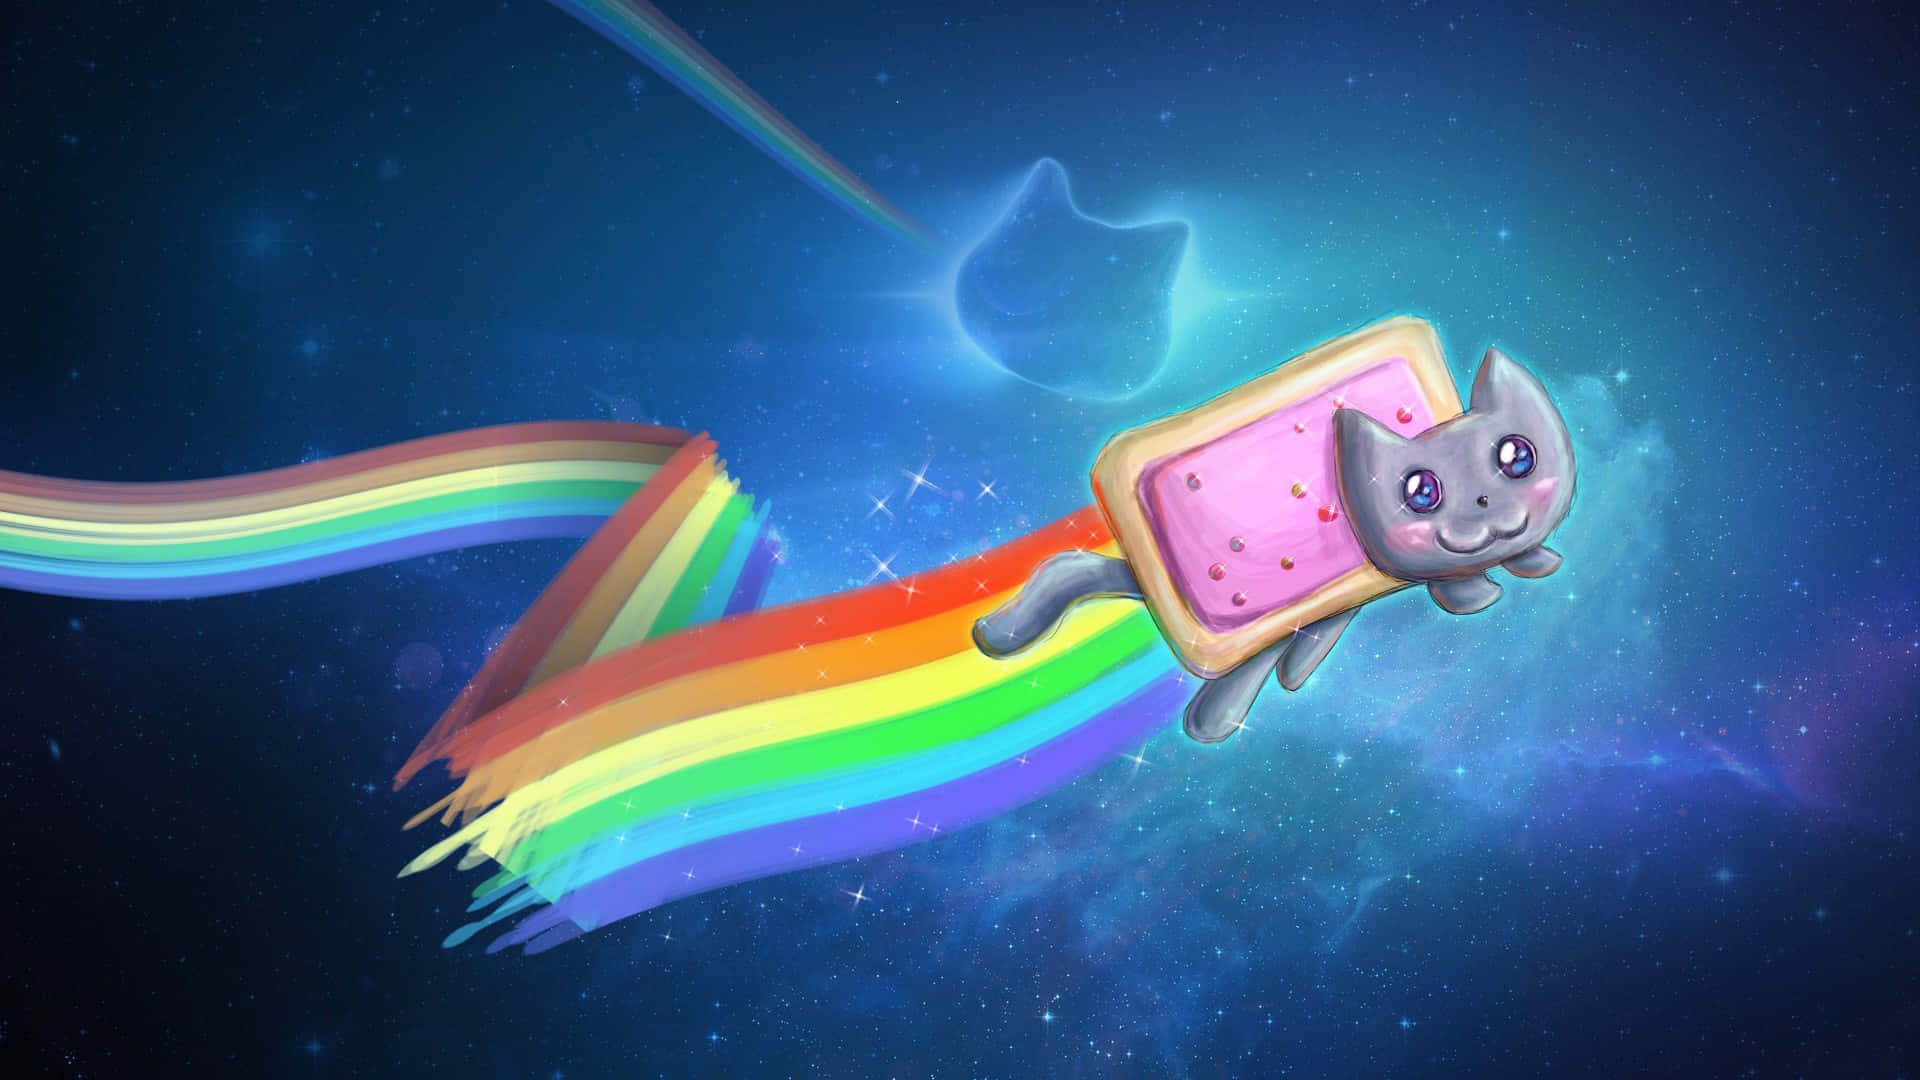 Caption: Colorful Nyan Cat zooming through space with a rainbow trail